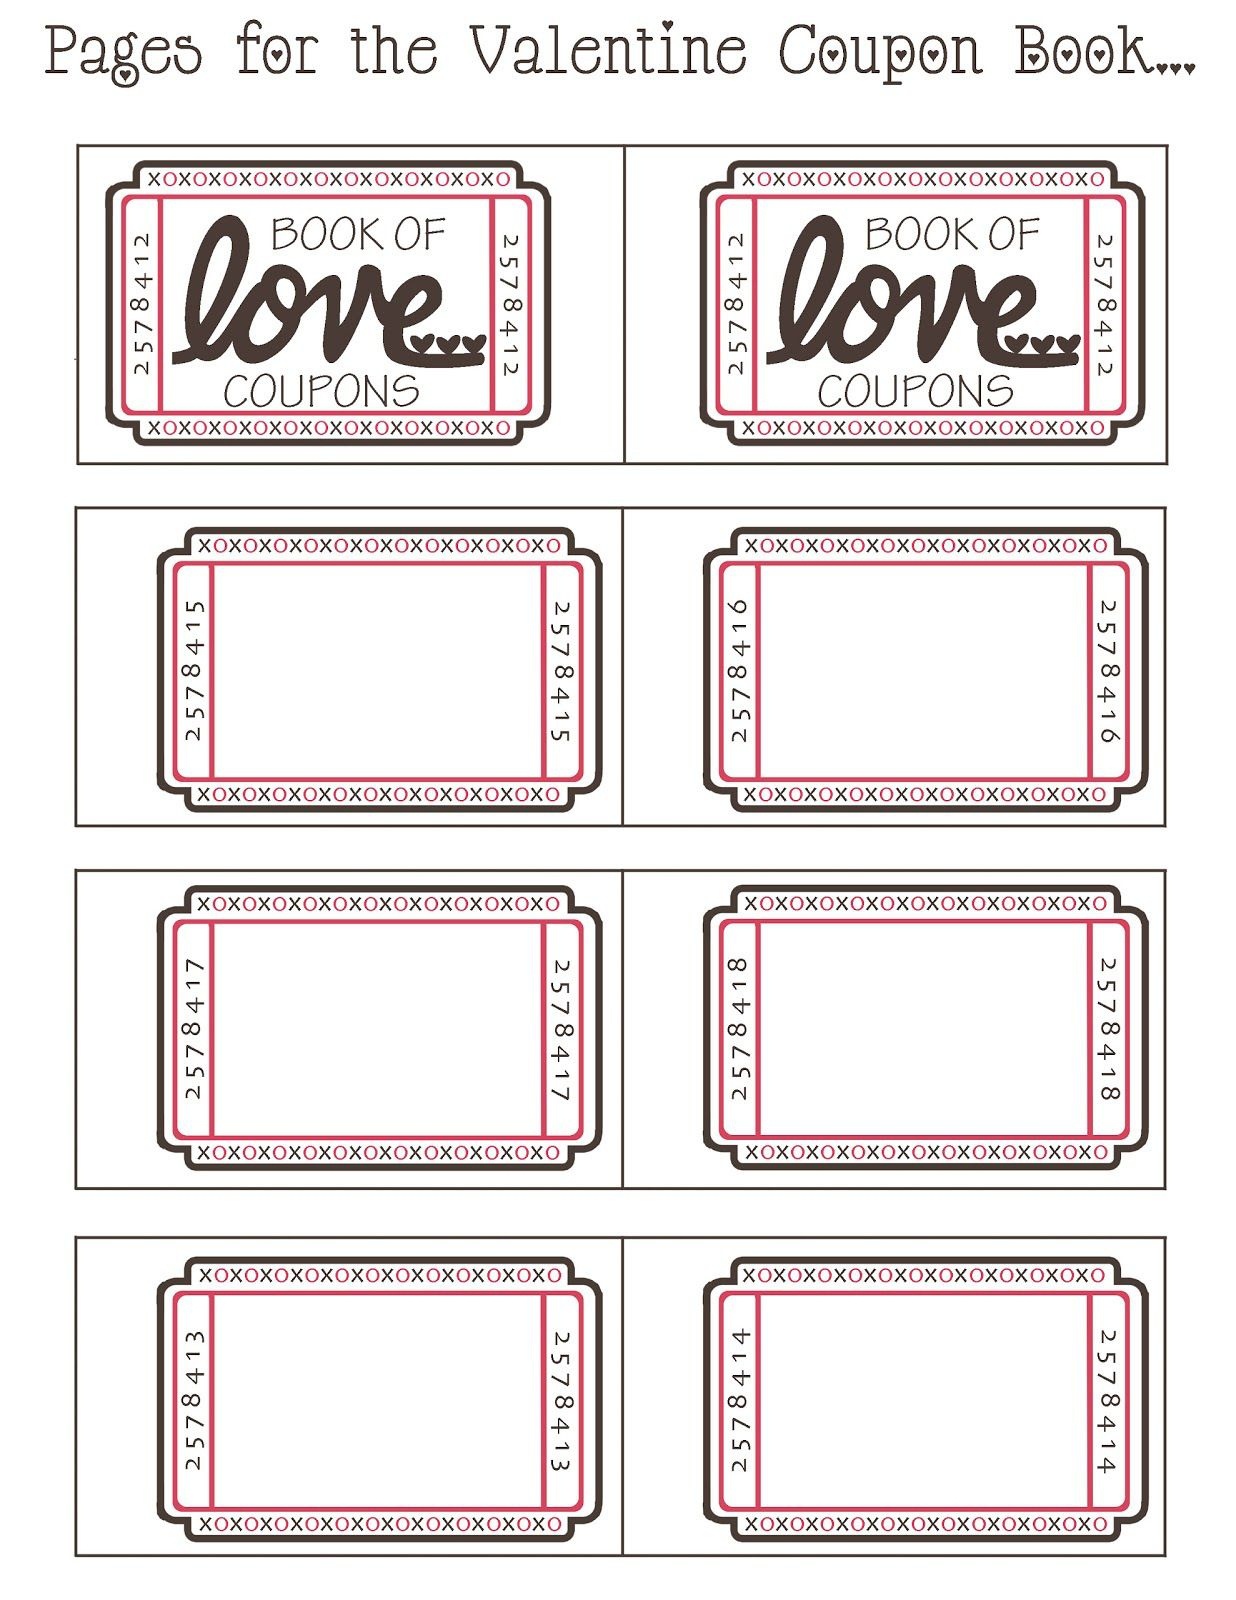 Coupon Book Ideas For Husband. Blank Love Coupon Templates Printable - Free Printable Coupon Templates